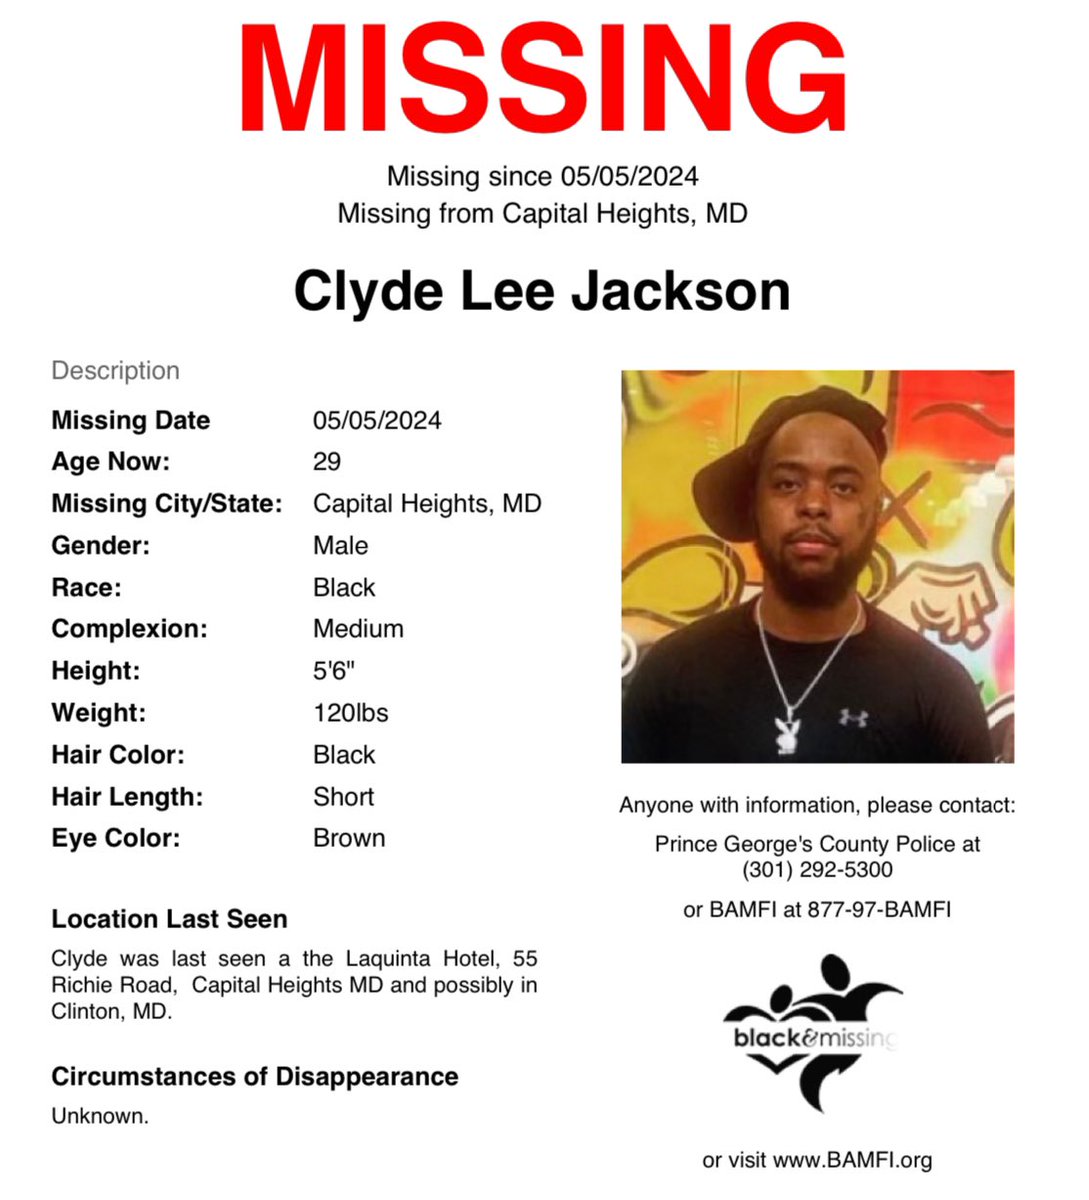 #CapitolHeights, #MD: 29y/o Clyde Jackson was last seen at the Laquinta Hotel on 55 Richie Rd on May 5th, 2024, wearing a hooded sweatshirt & blue jeans. Please share to #HelpUsFindClydeJackson #ClydeJackson